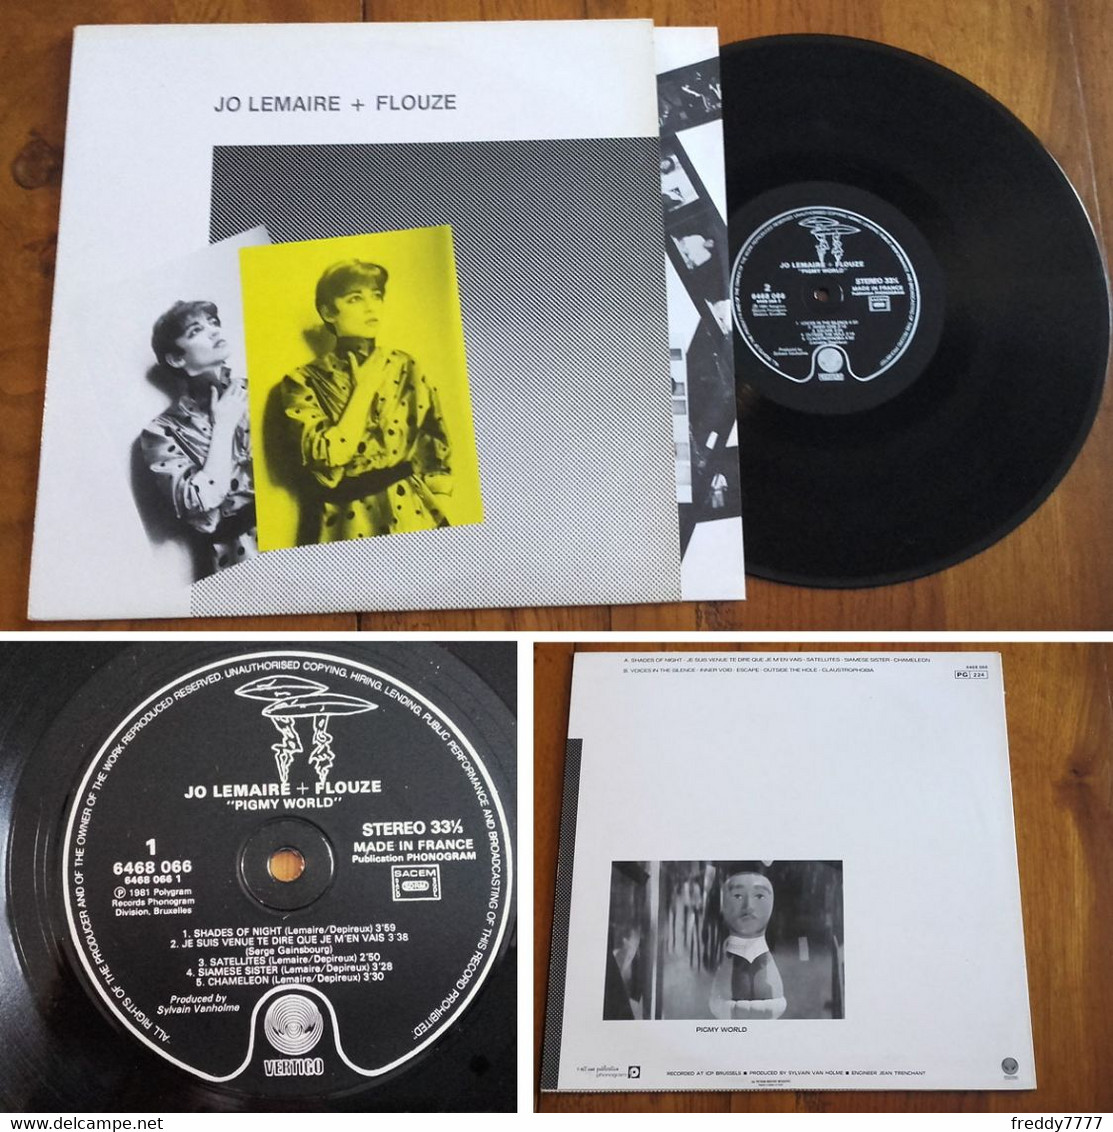 RARE French LP 33t RPM (12") JO LEMAIRE + FLOUZE (Serge Gainsbourg, 1981) - Collector's Editions